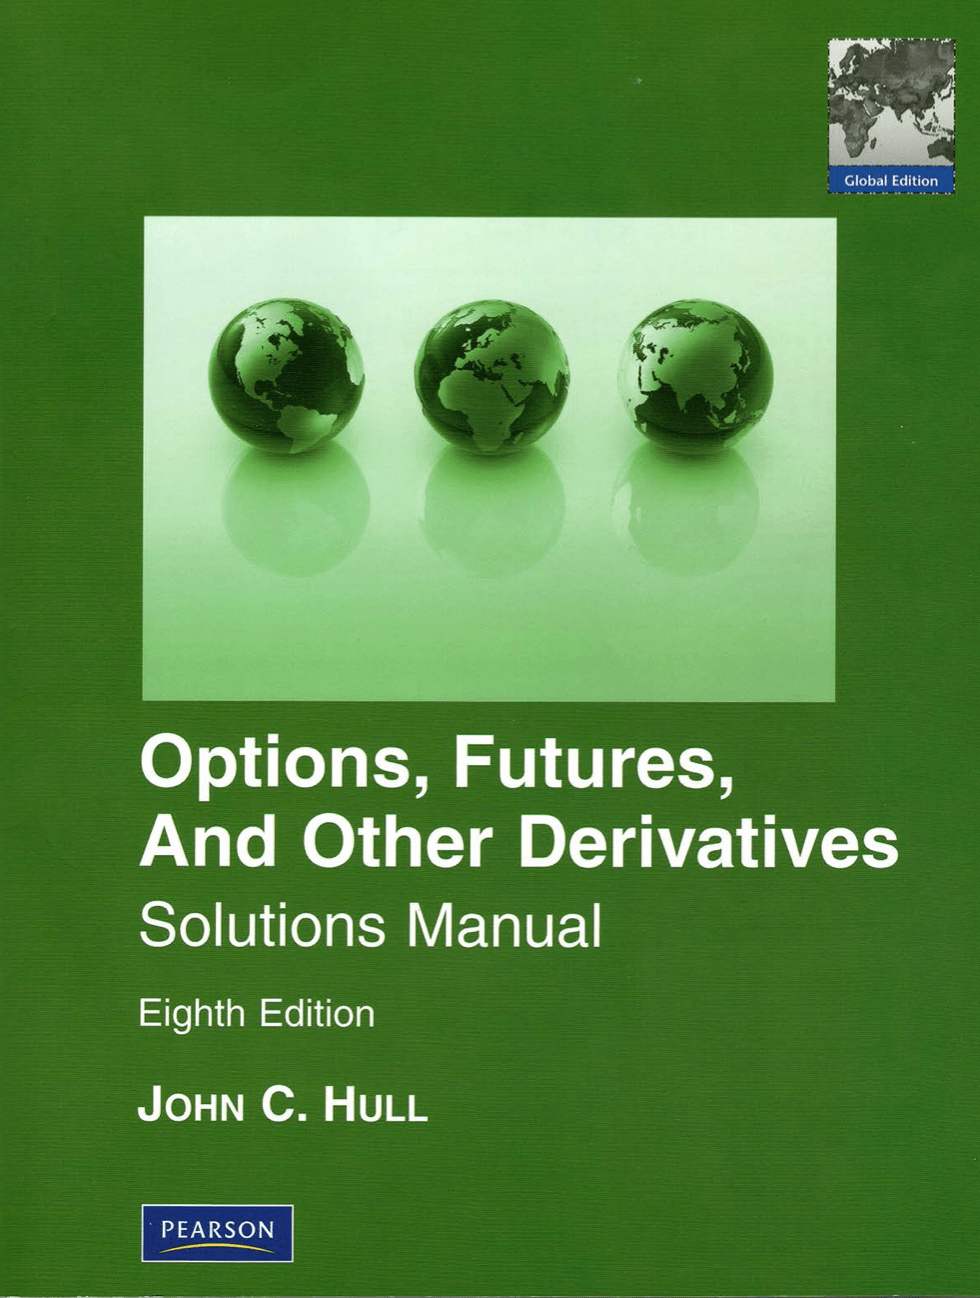 Options, Futures and other Derivatives Solutions Manual book